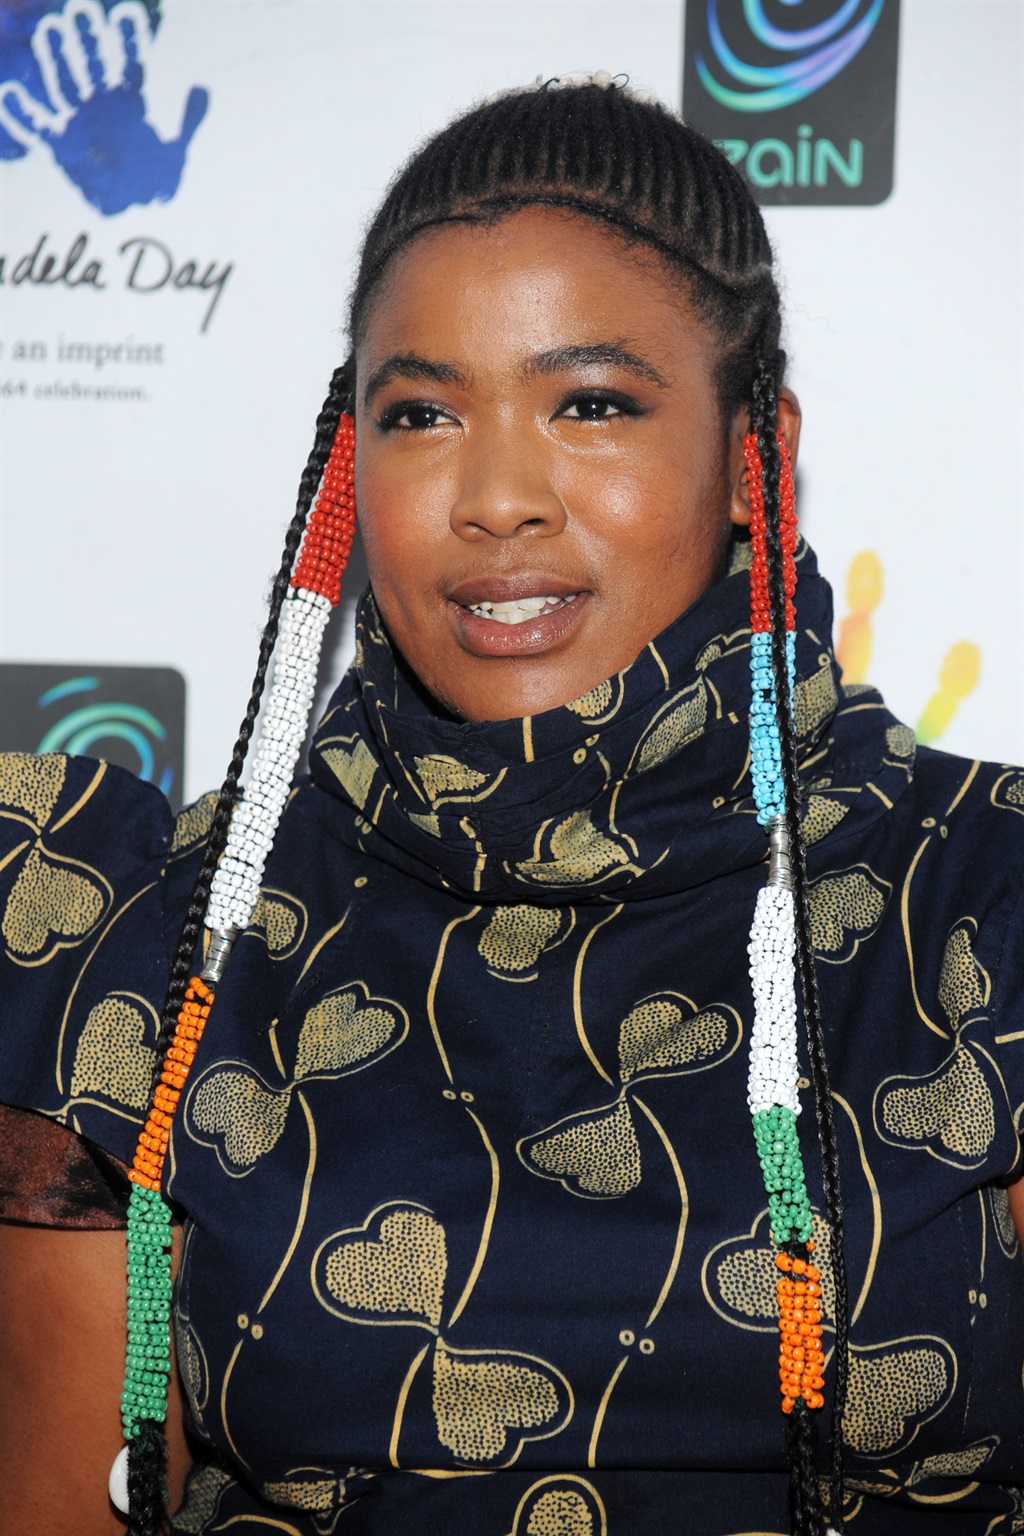 Singer Thandiswa Mazwai attends the Mandela Day: A